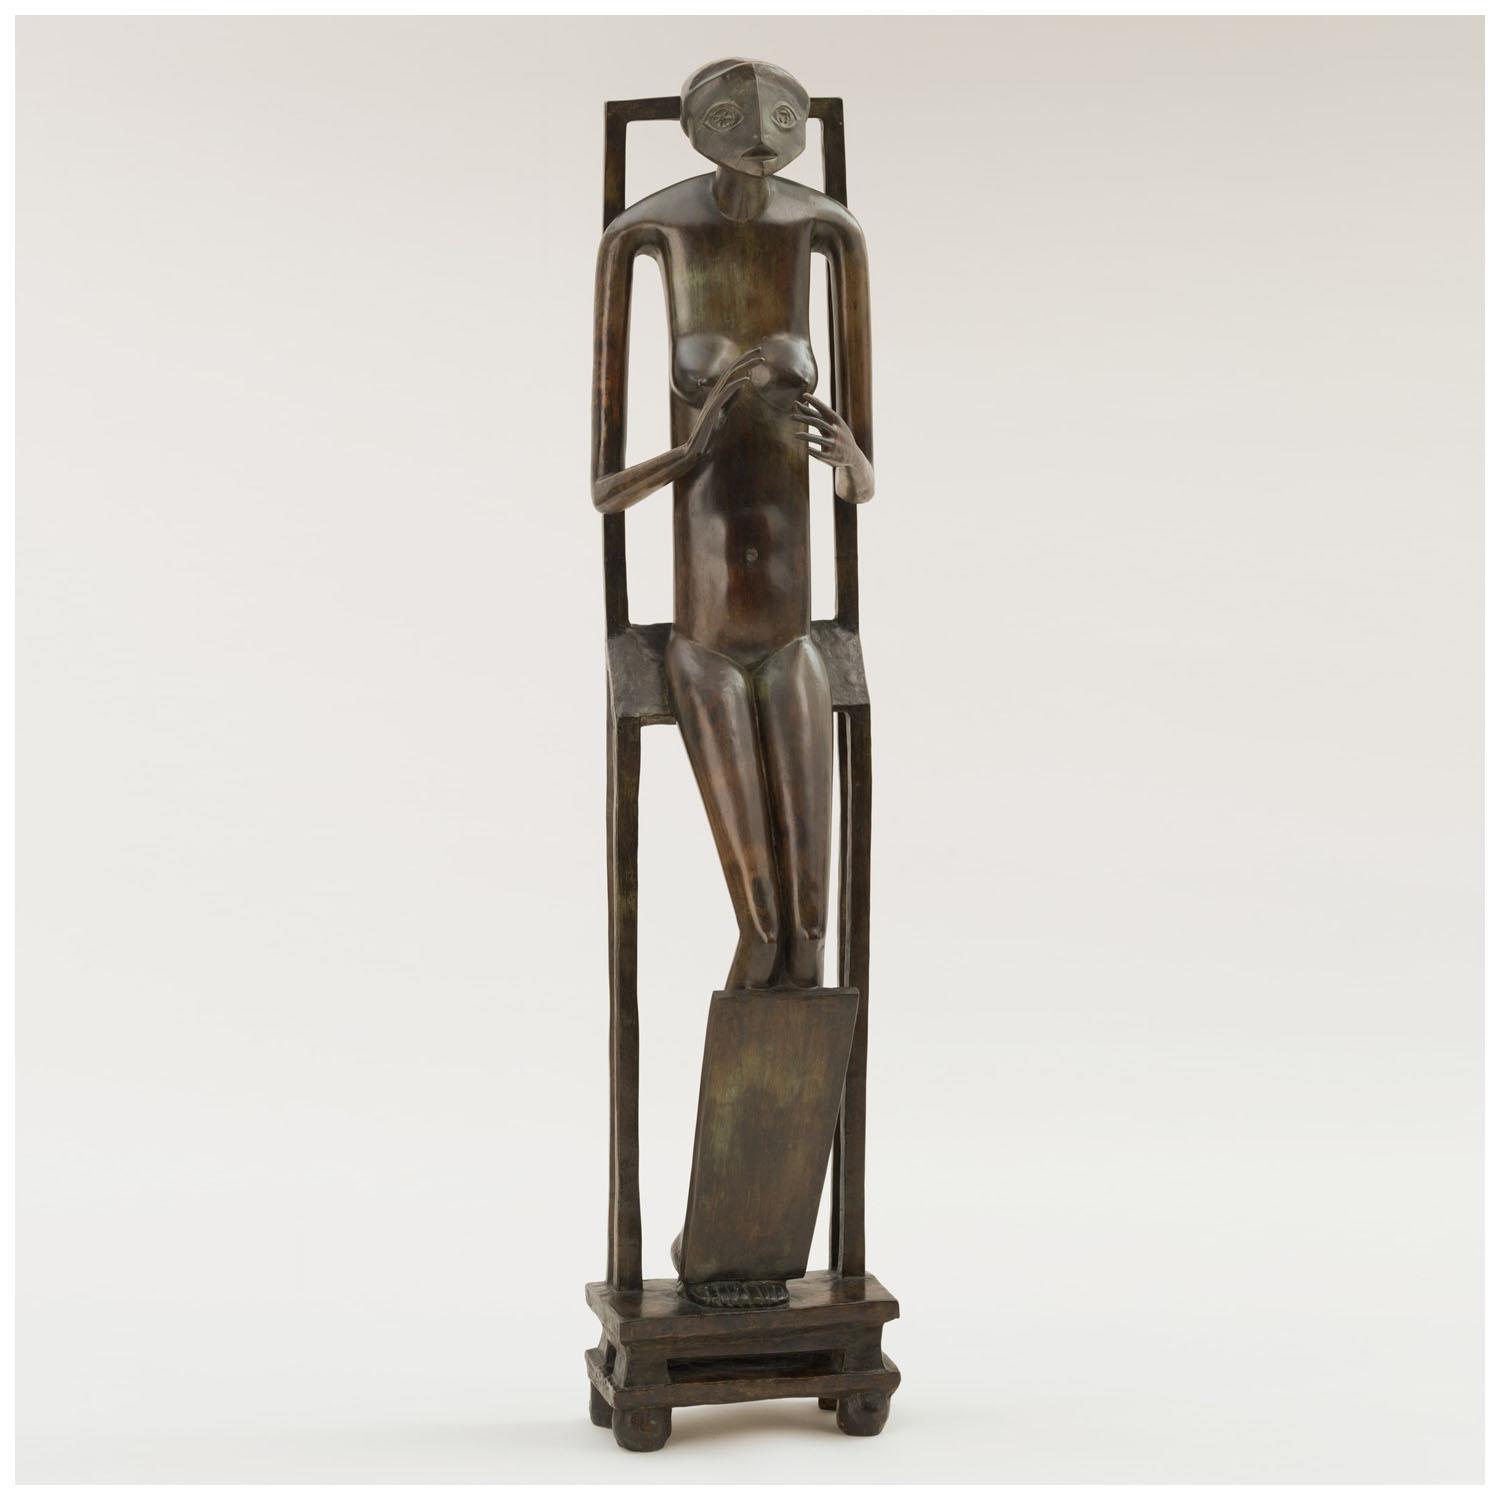 Alberto Giacometti. Invisible Object (Hands Holding the Void). 1934. MoMA NY